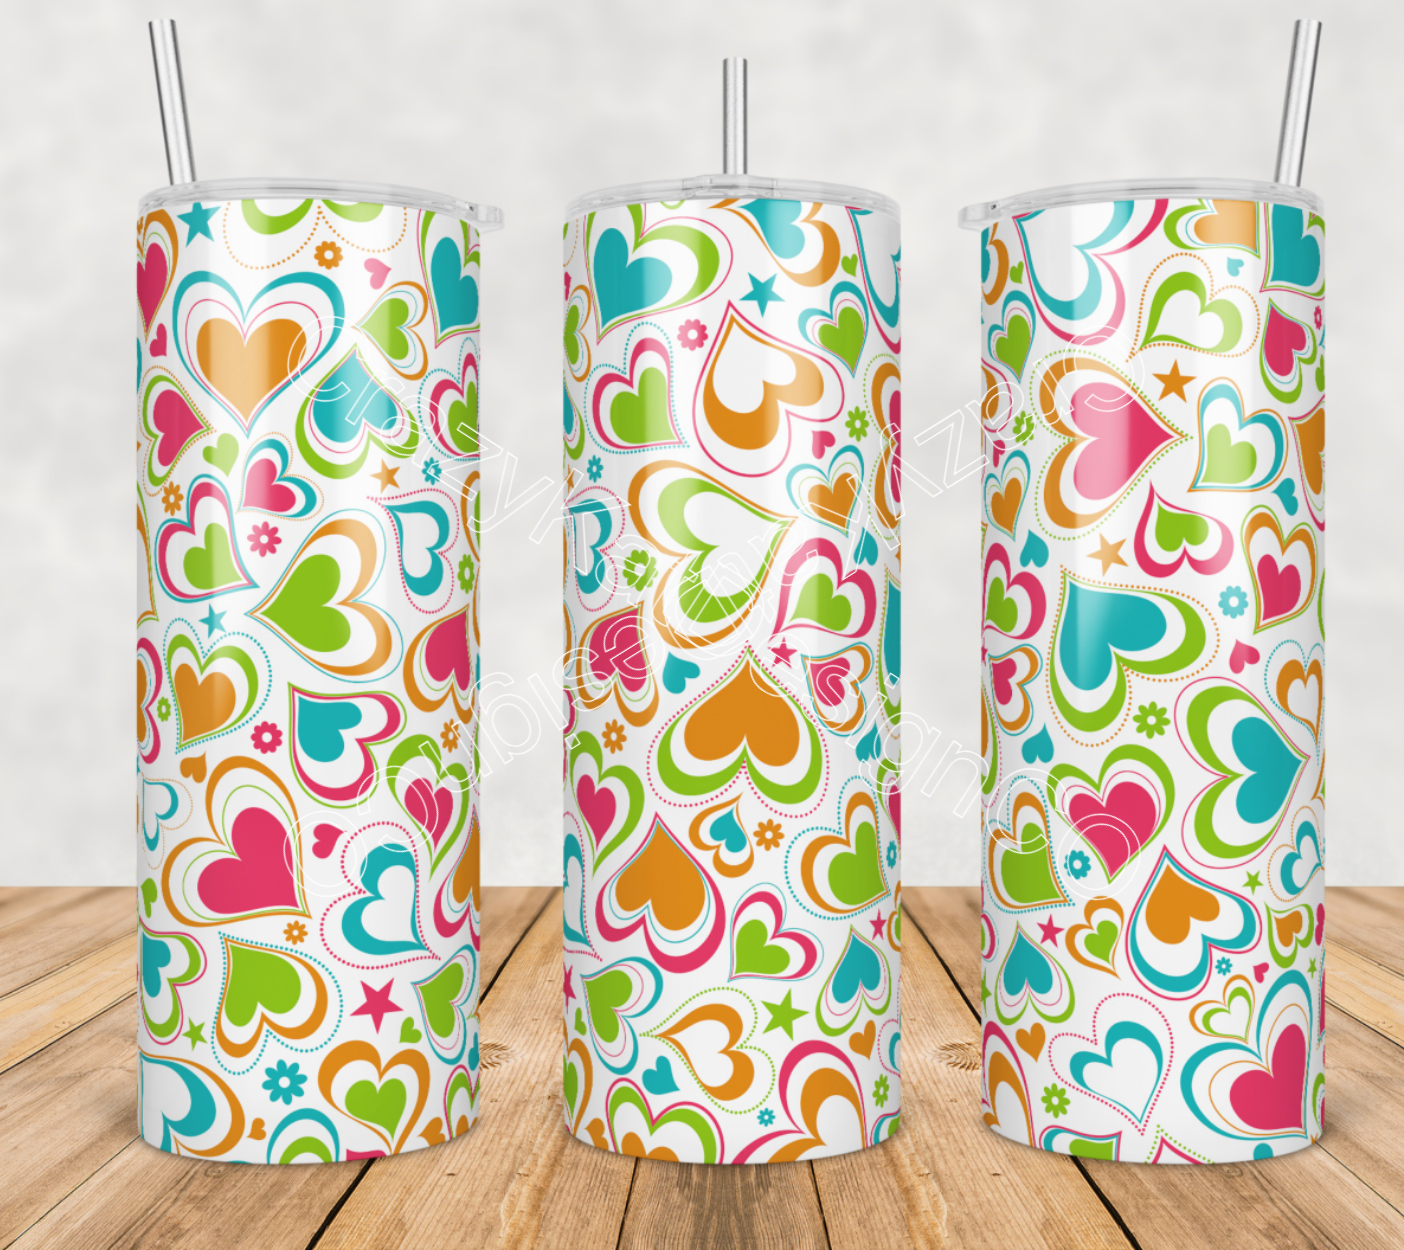 CUSTOMIZABLE TEACHER HOT OR COLD TUMBLERS